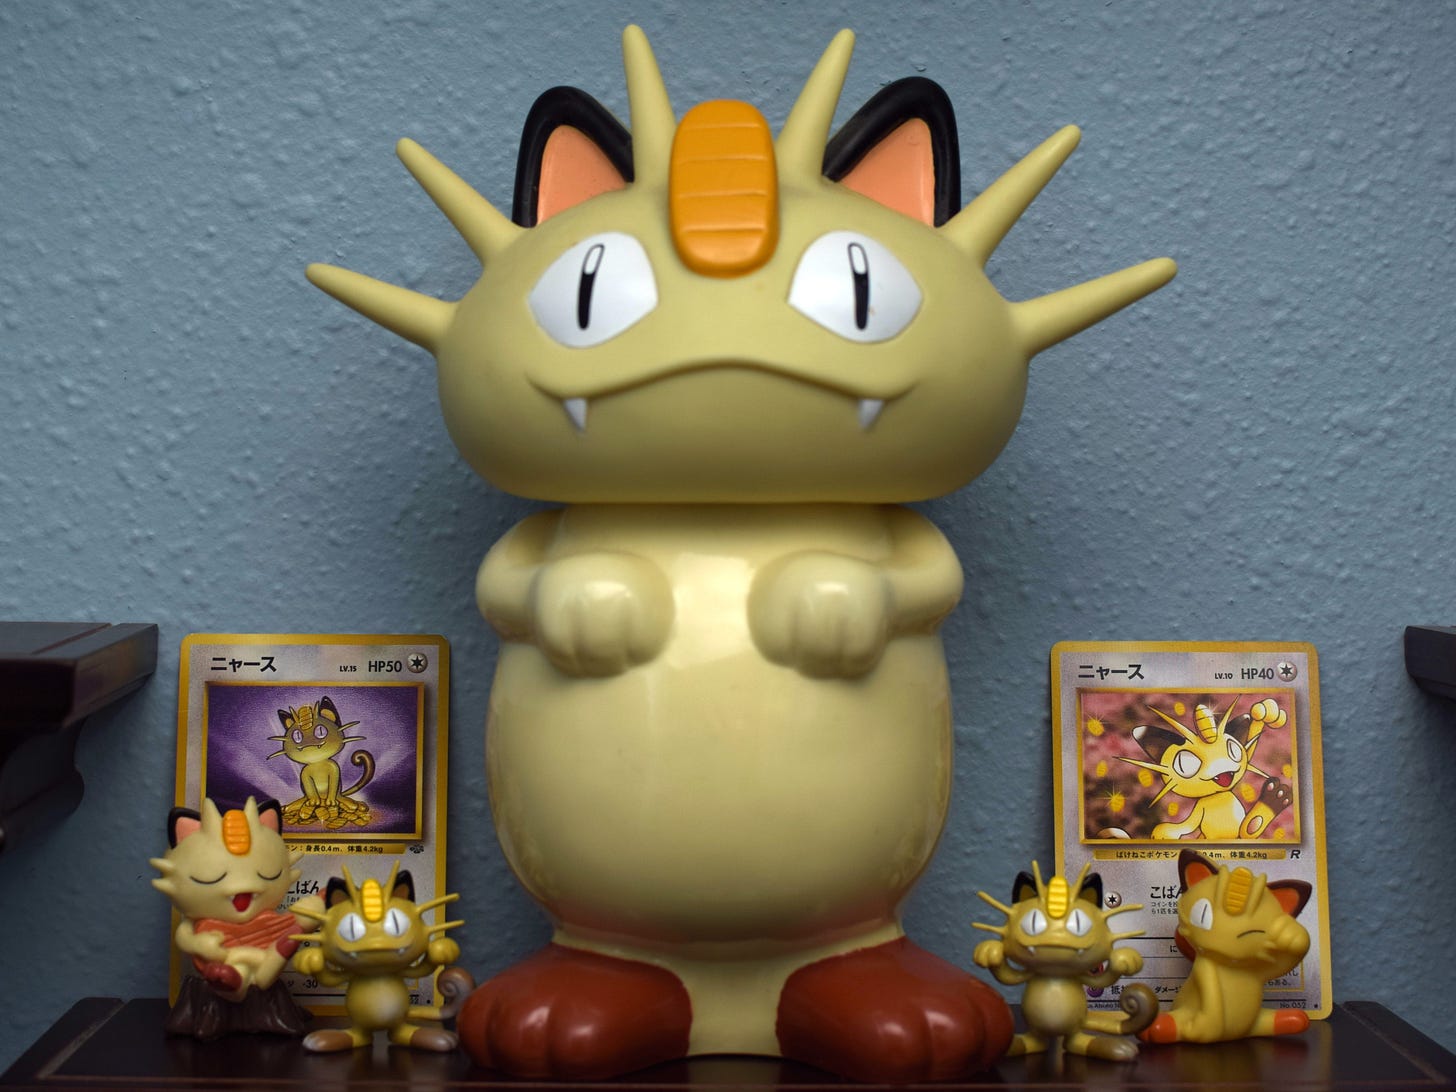 Living up to his online username, Chris (Meowth346) has a collection of trading cards, figures, and even a drinking flask based on the popular feline Pokémon!